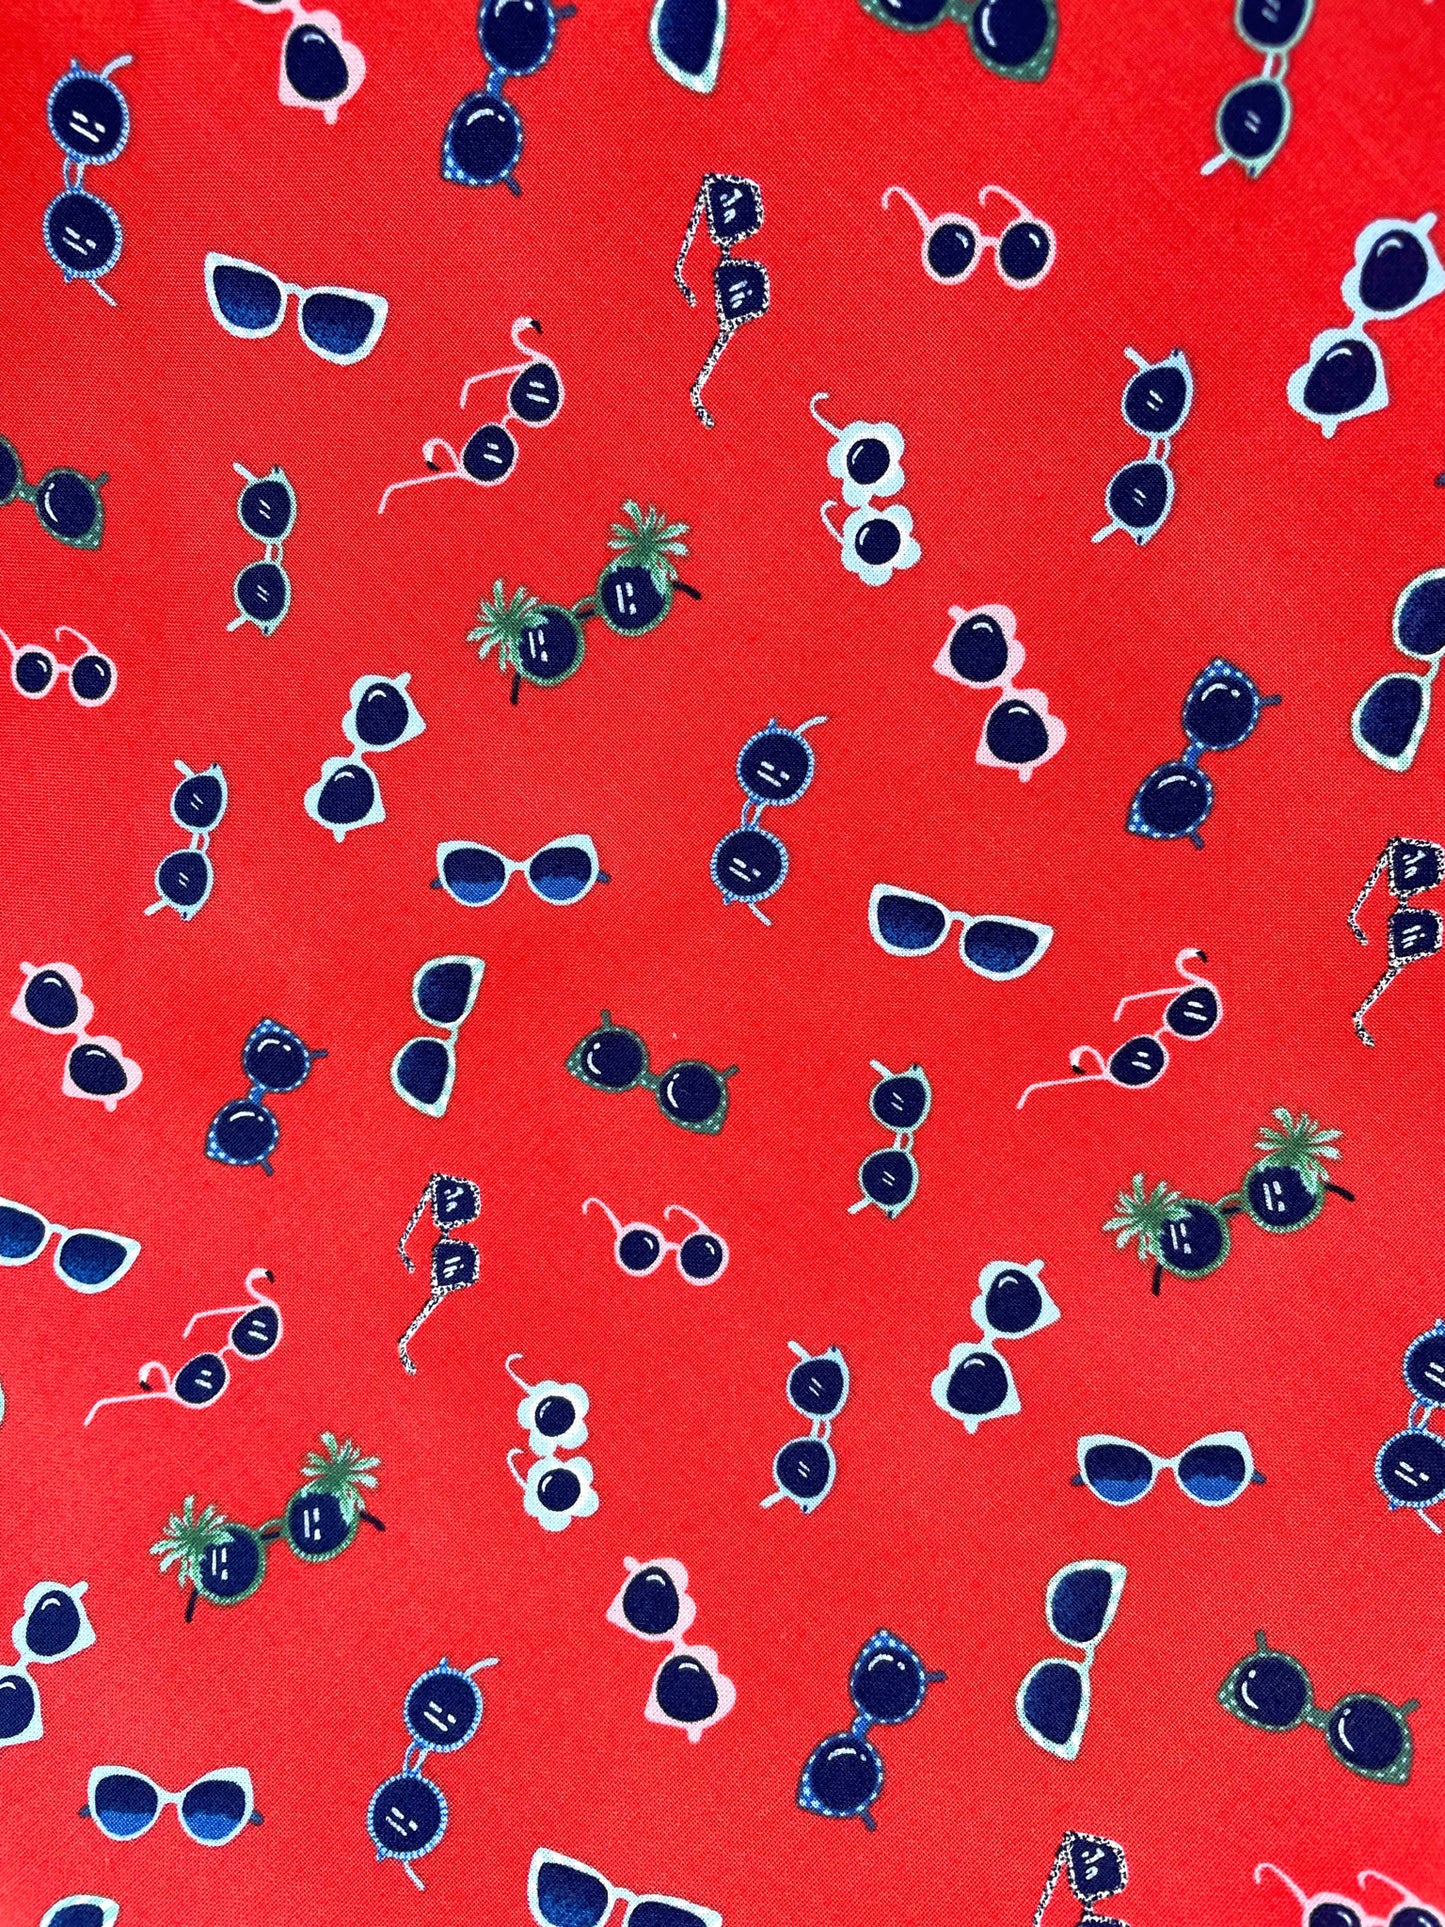 a close up of fabric showing tossed sunglasses print on red background